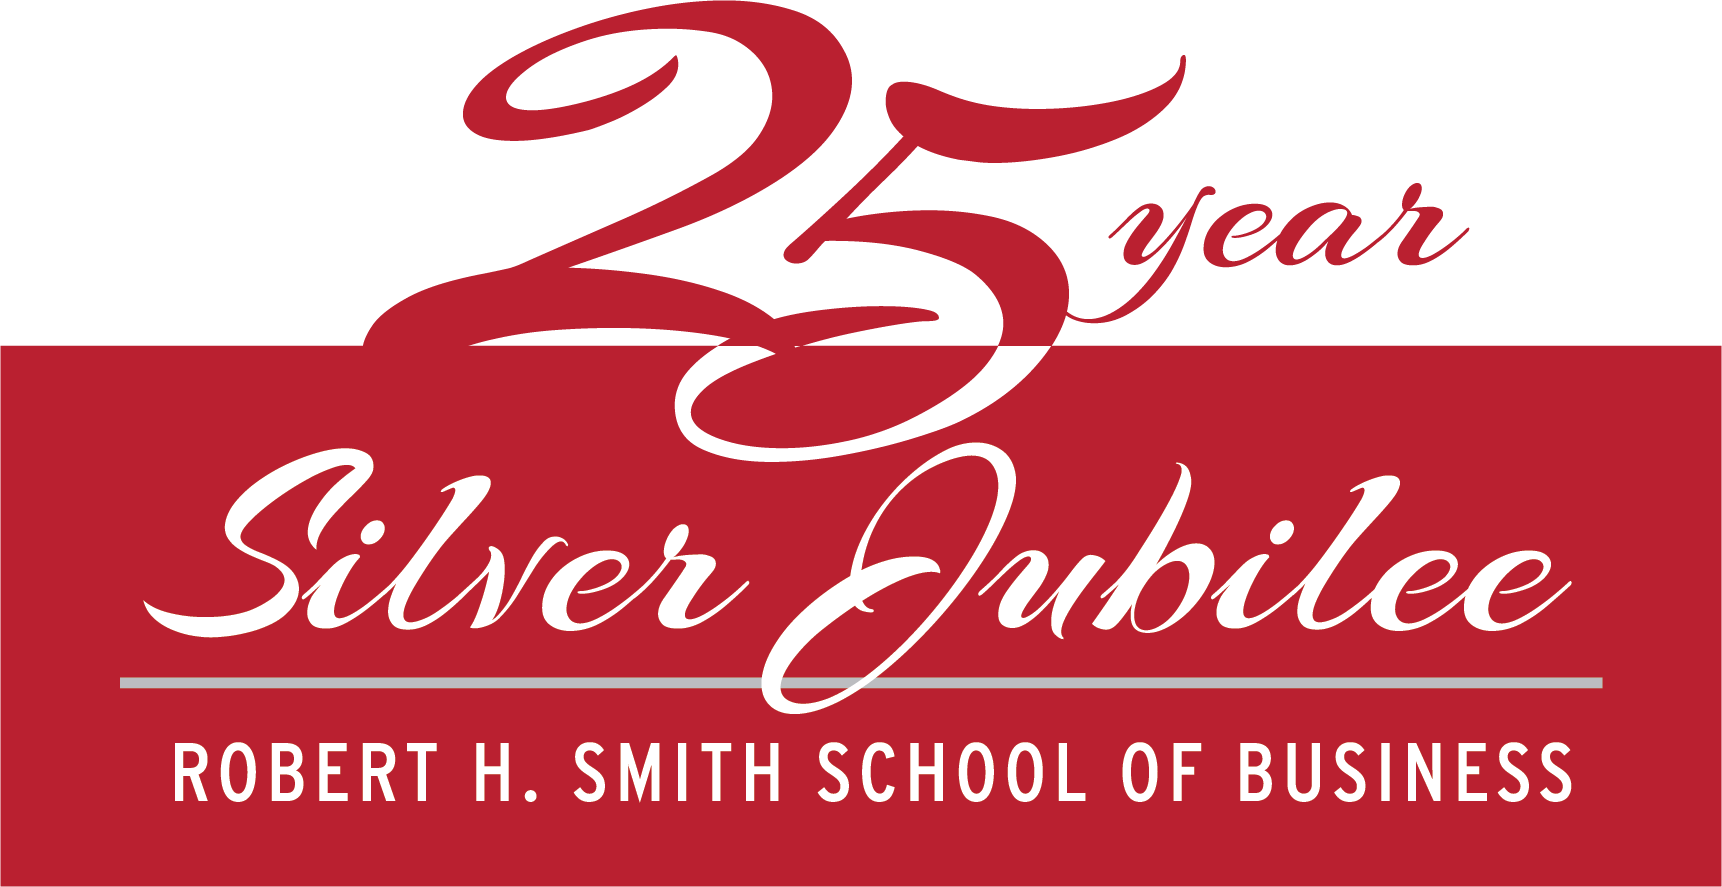 Smith School Celebrates 25th Year of Naming with Silver Jubilee